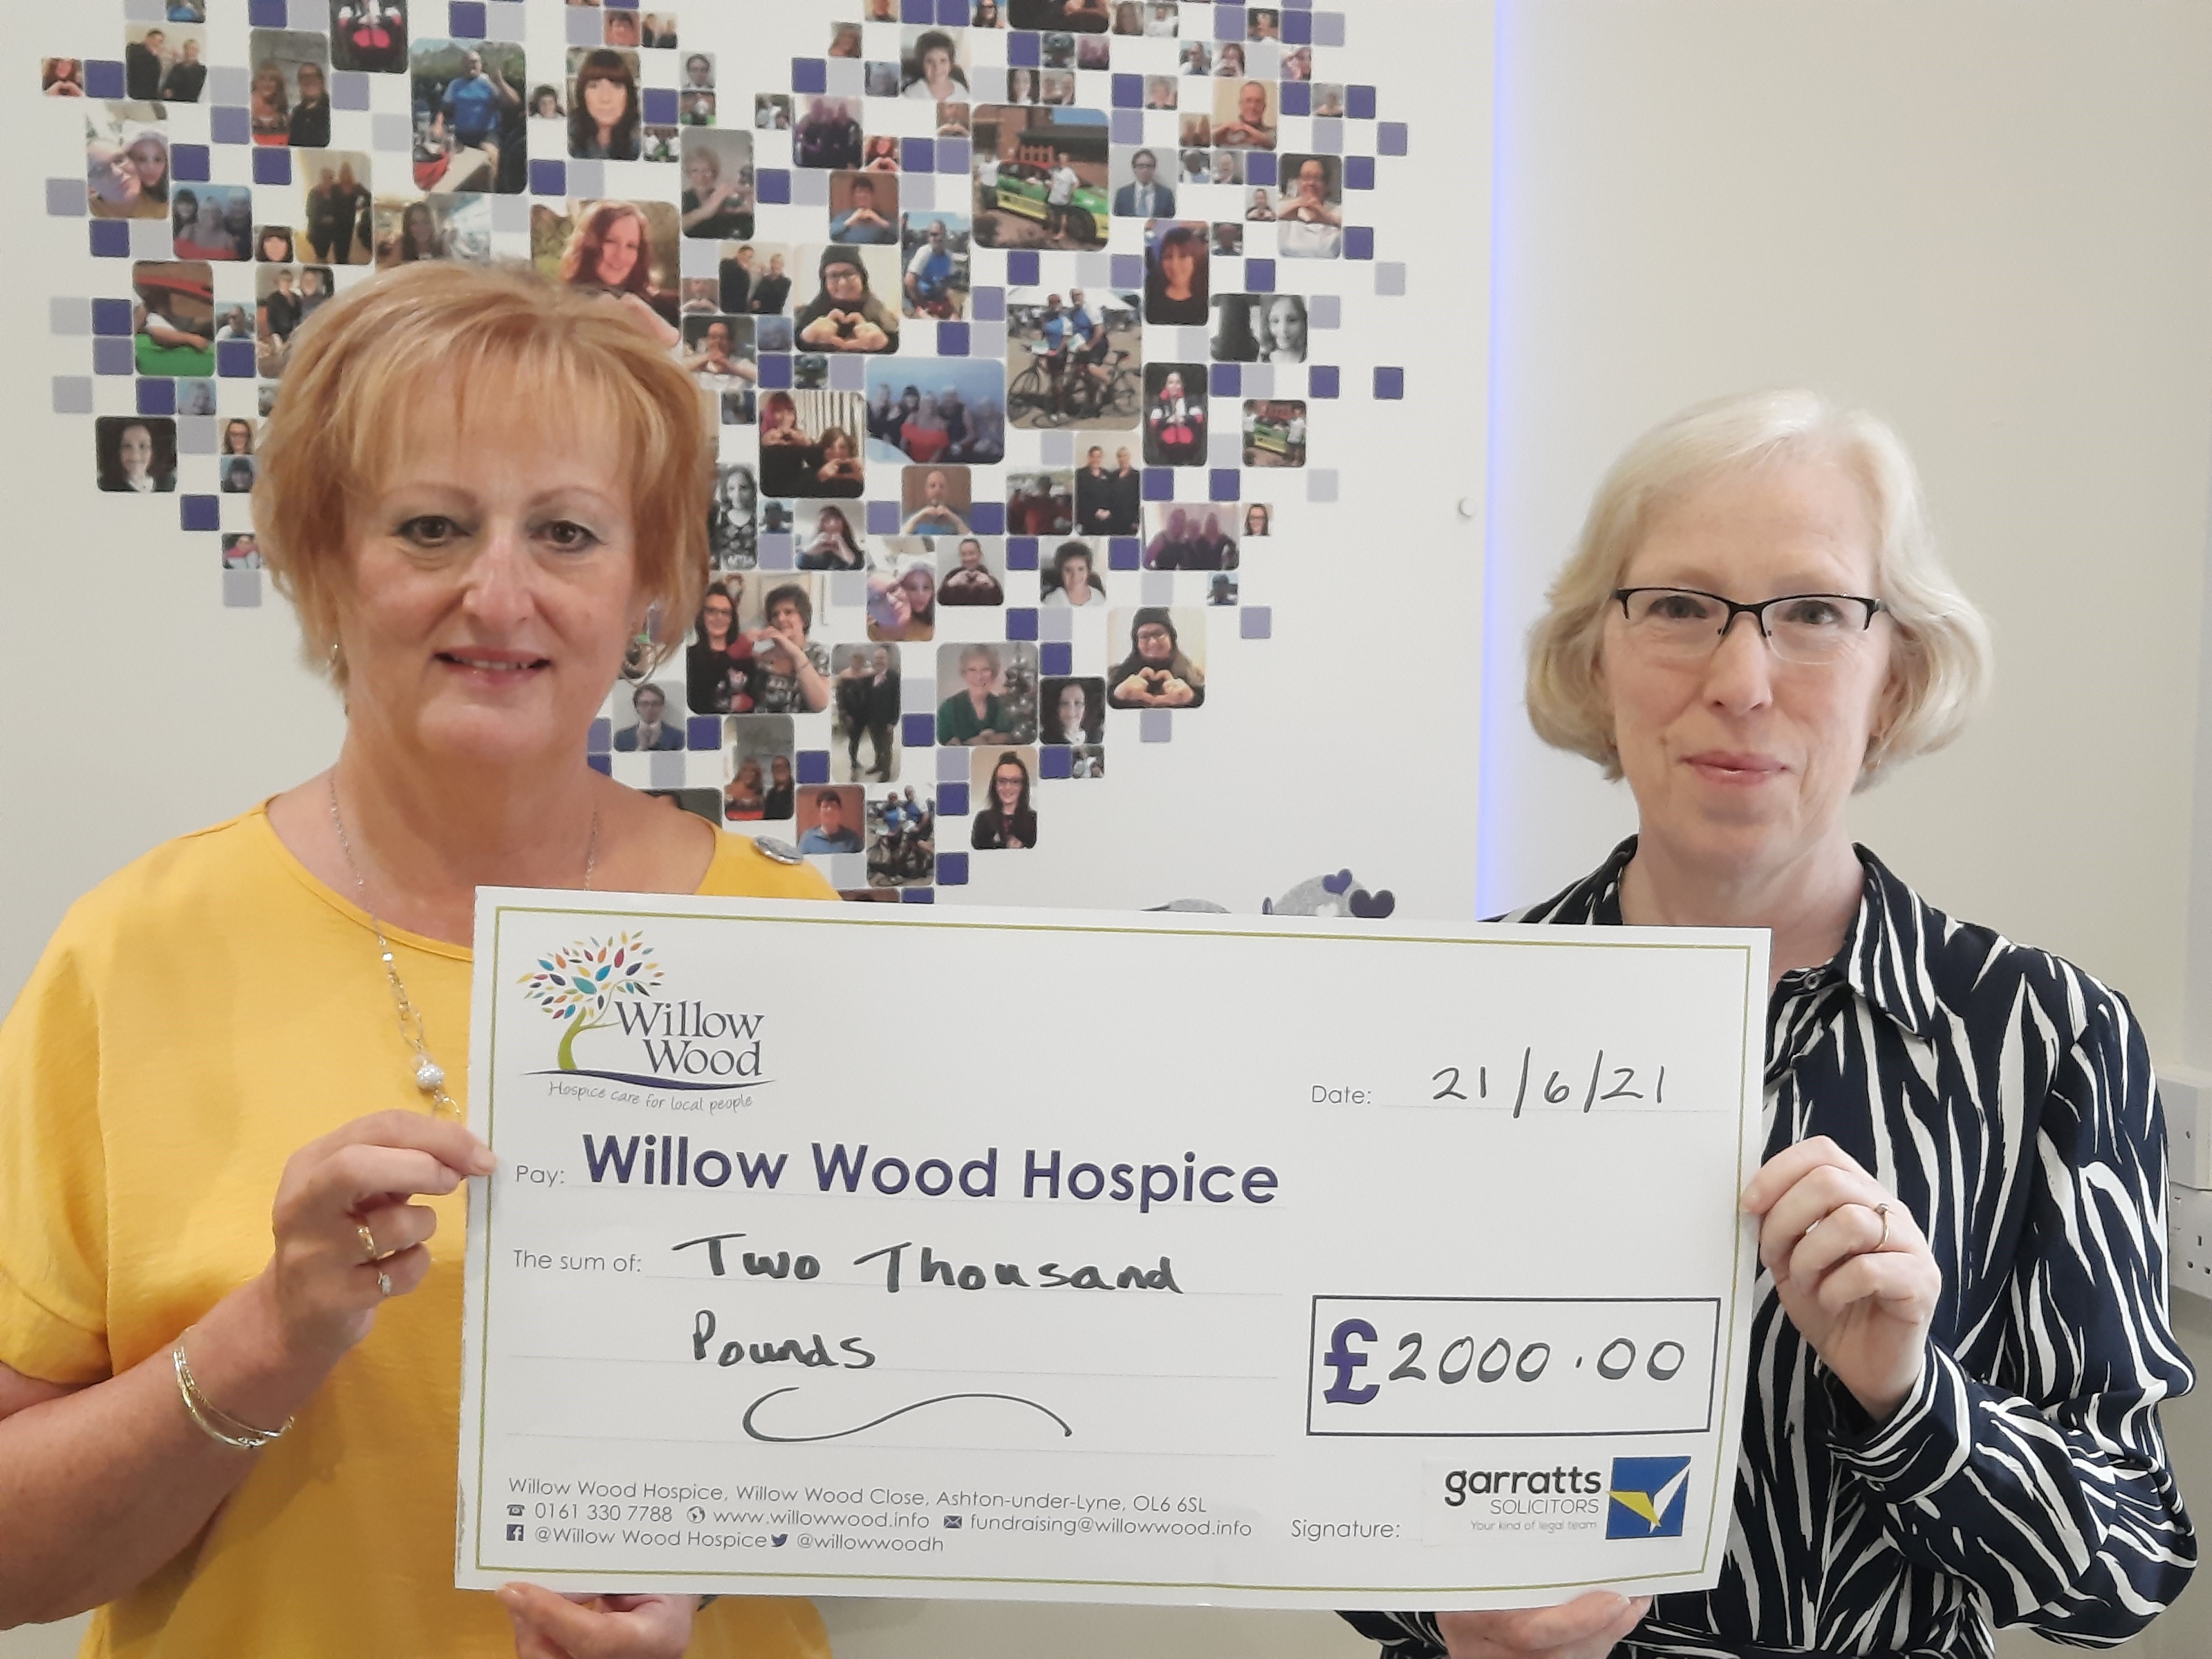 
									Garratts present £2,000 to Willow Woods Hospice
								